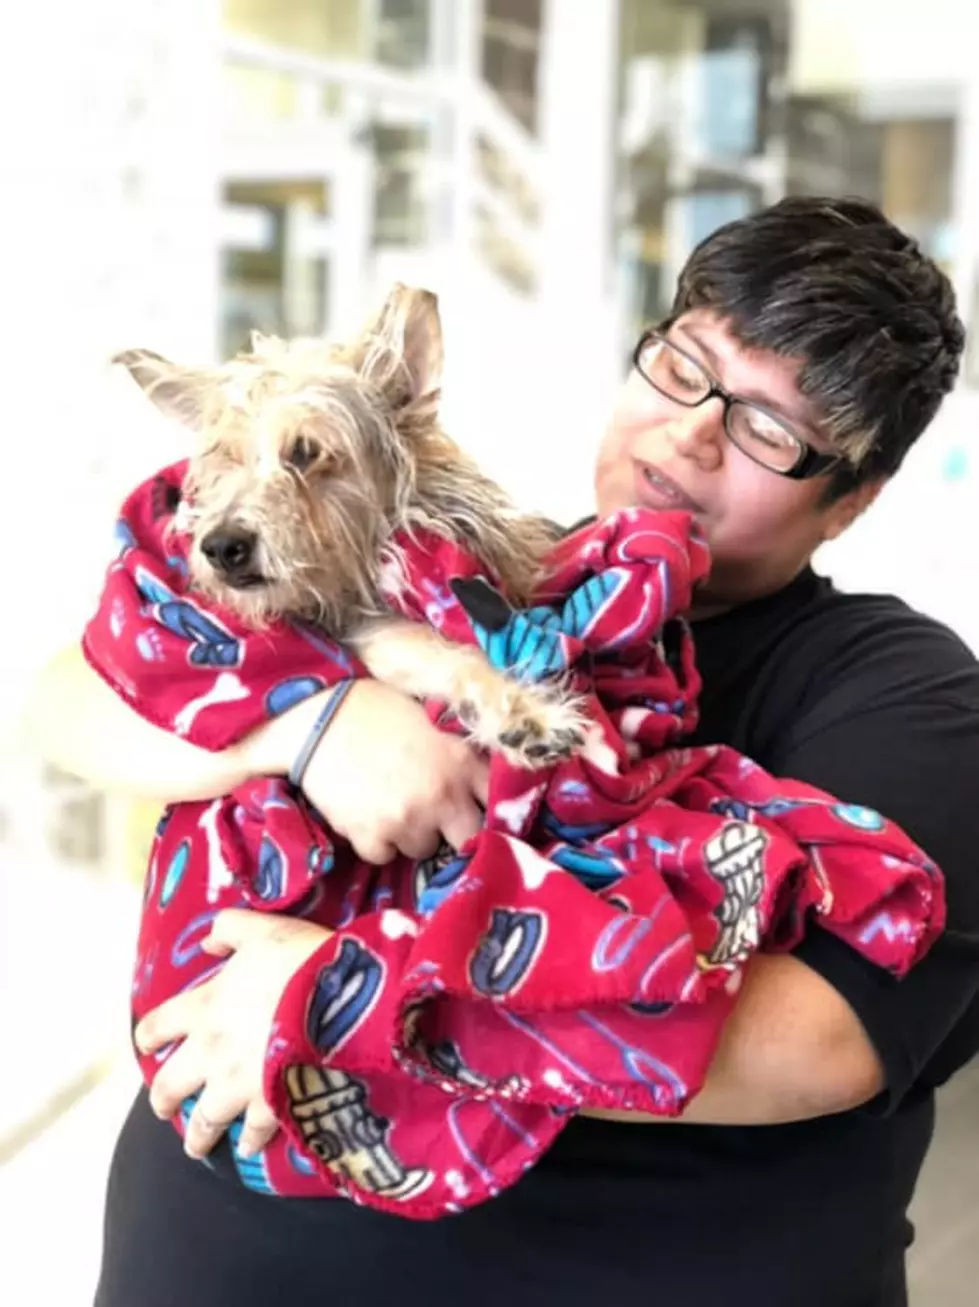 Woman Reunited With Dog After 9 Years Thanks to Lubbock Animal Shelter